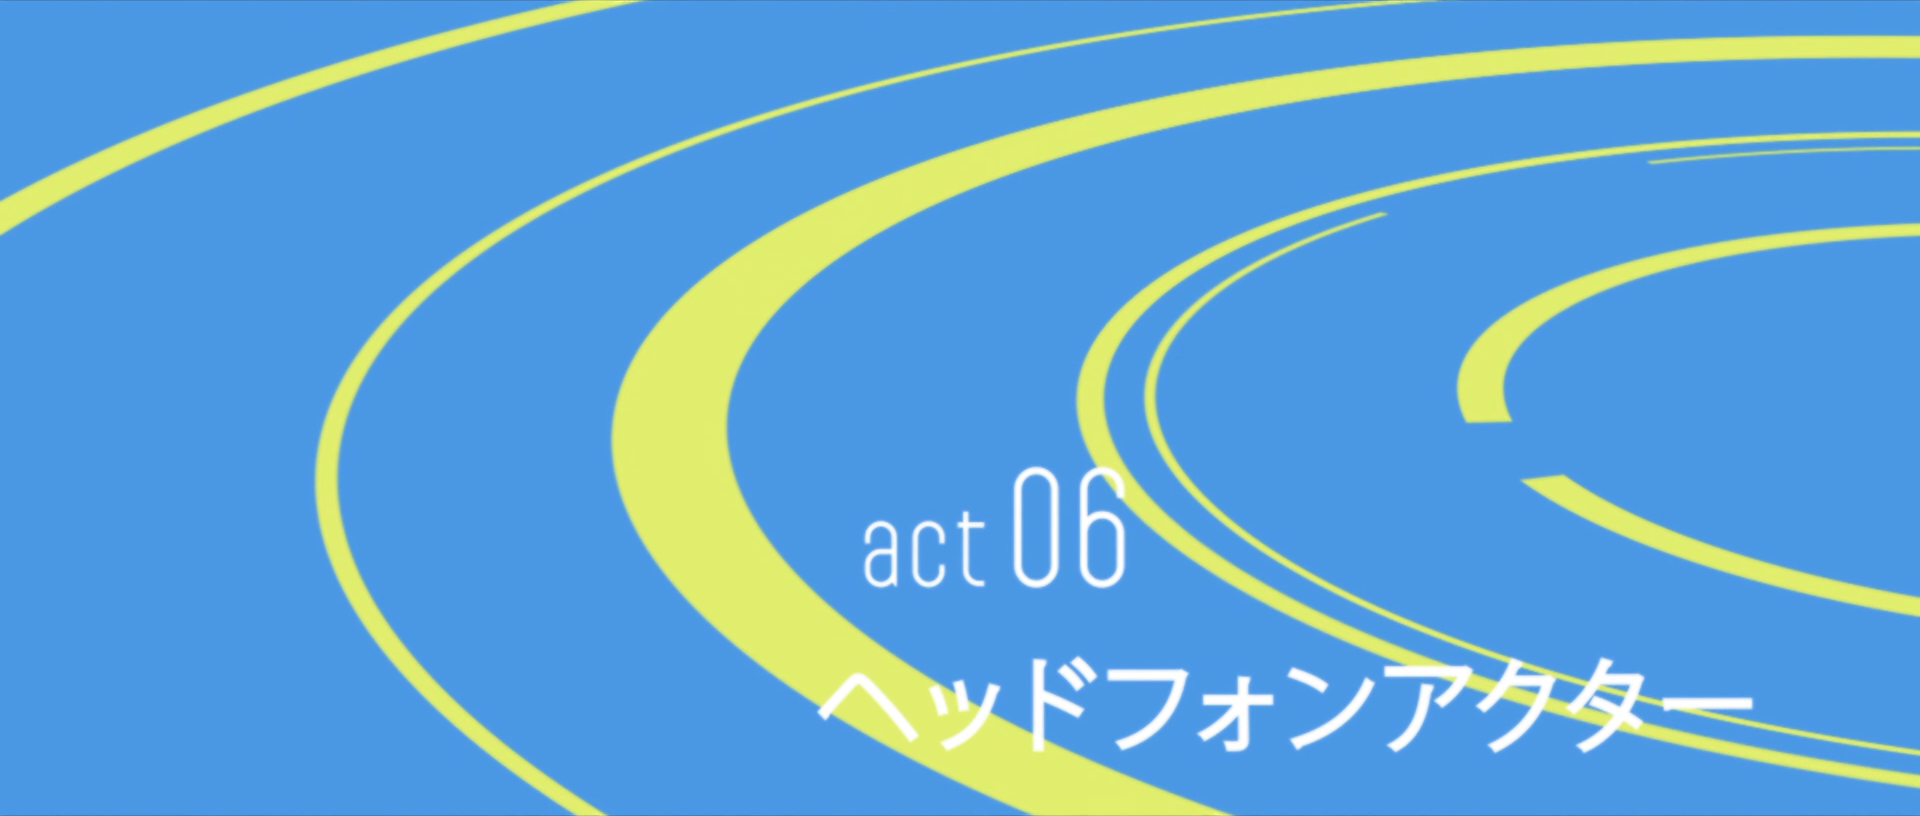 Mekaku City Actors episodes 1 and 2: Artificial Enemy and Kisaragi  Attention – Beneath the Tangles